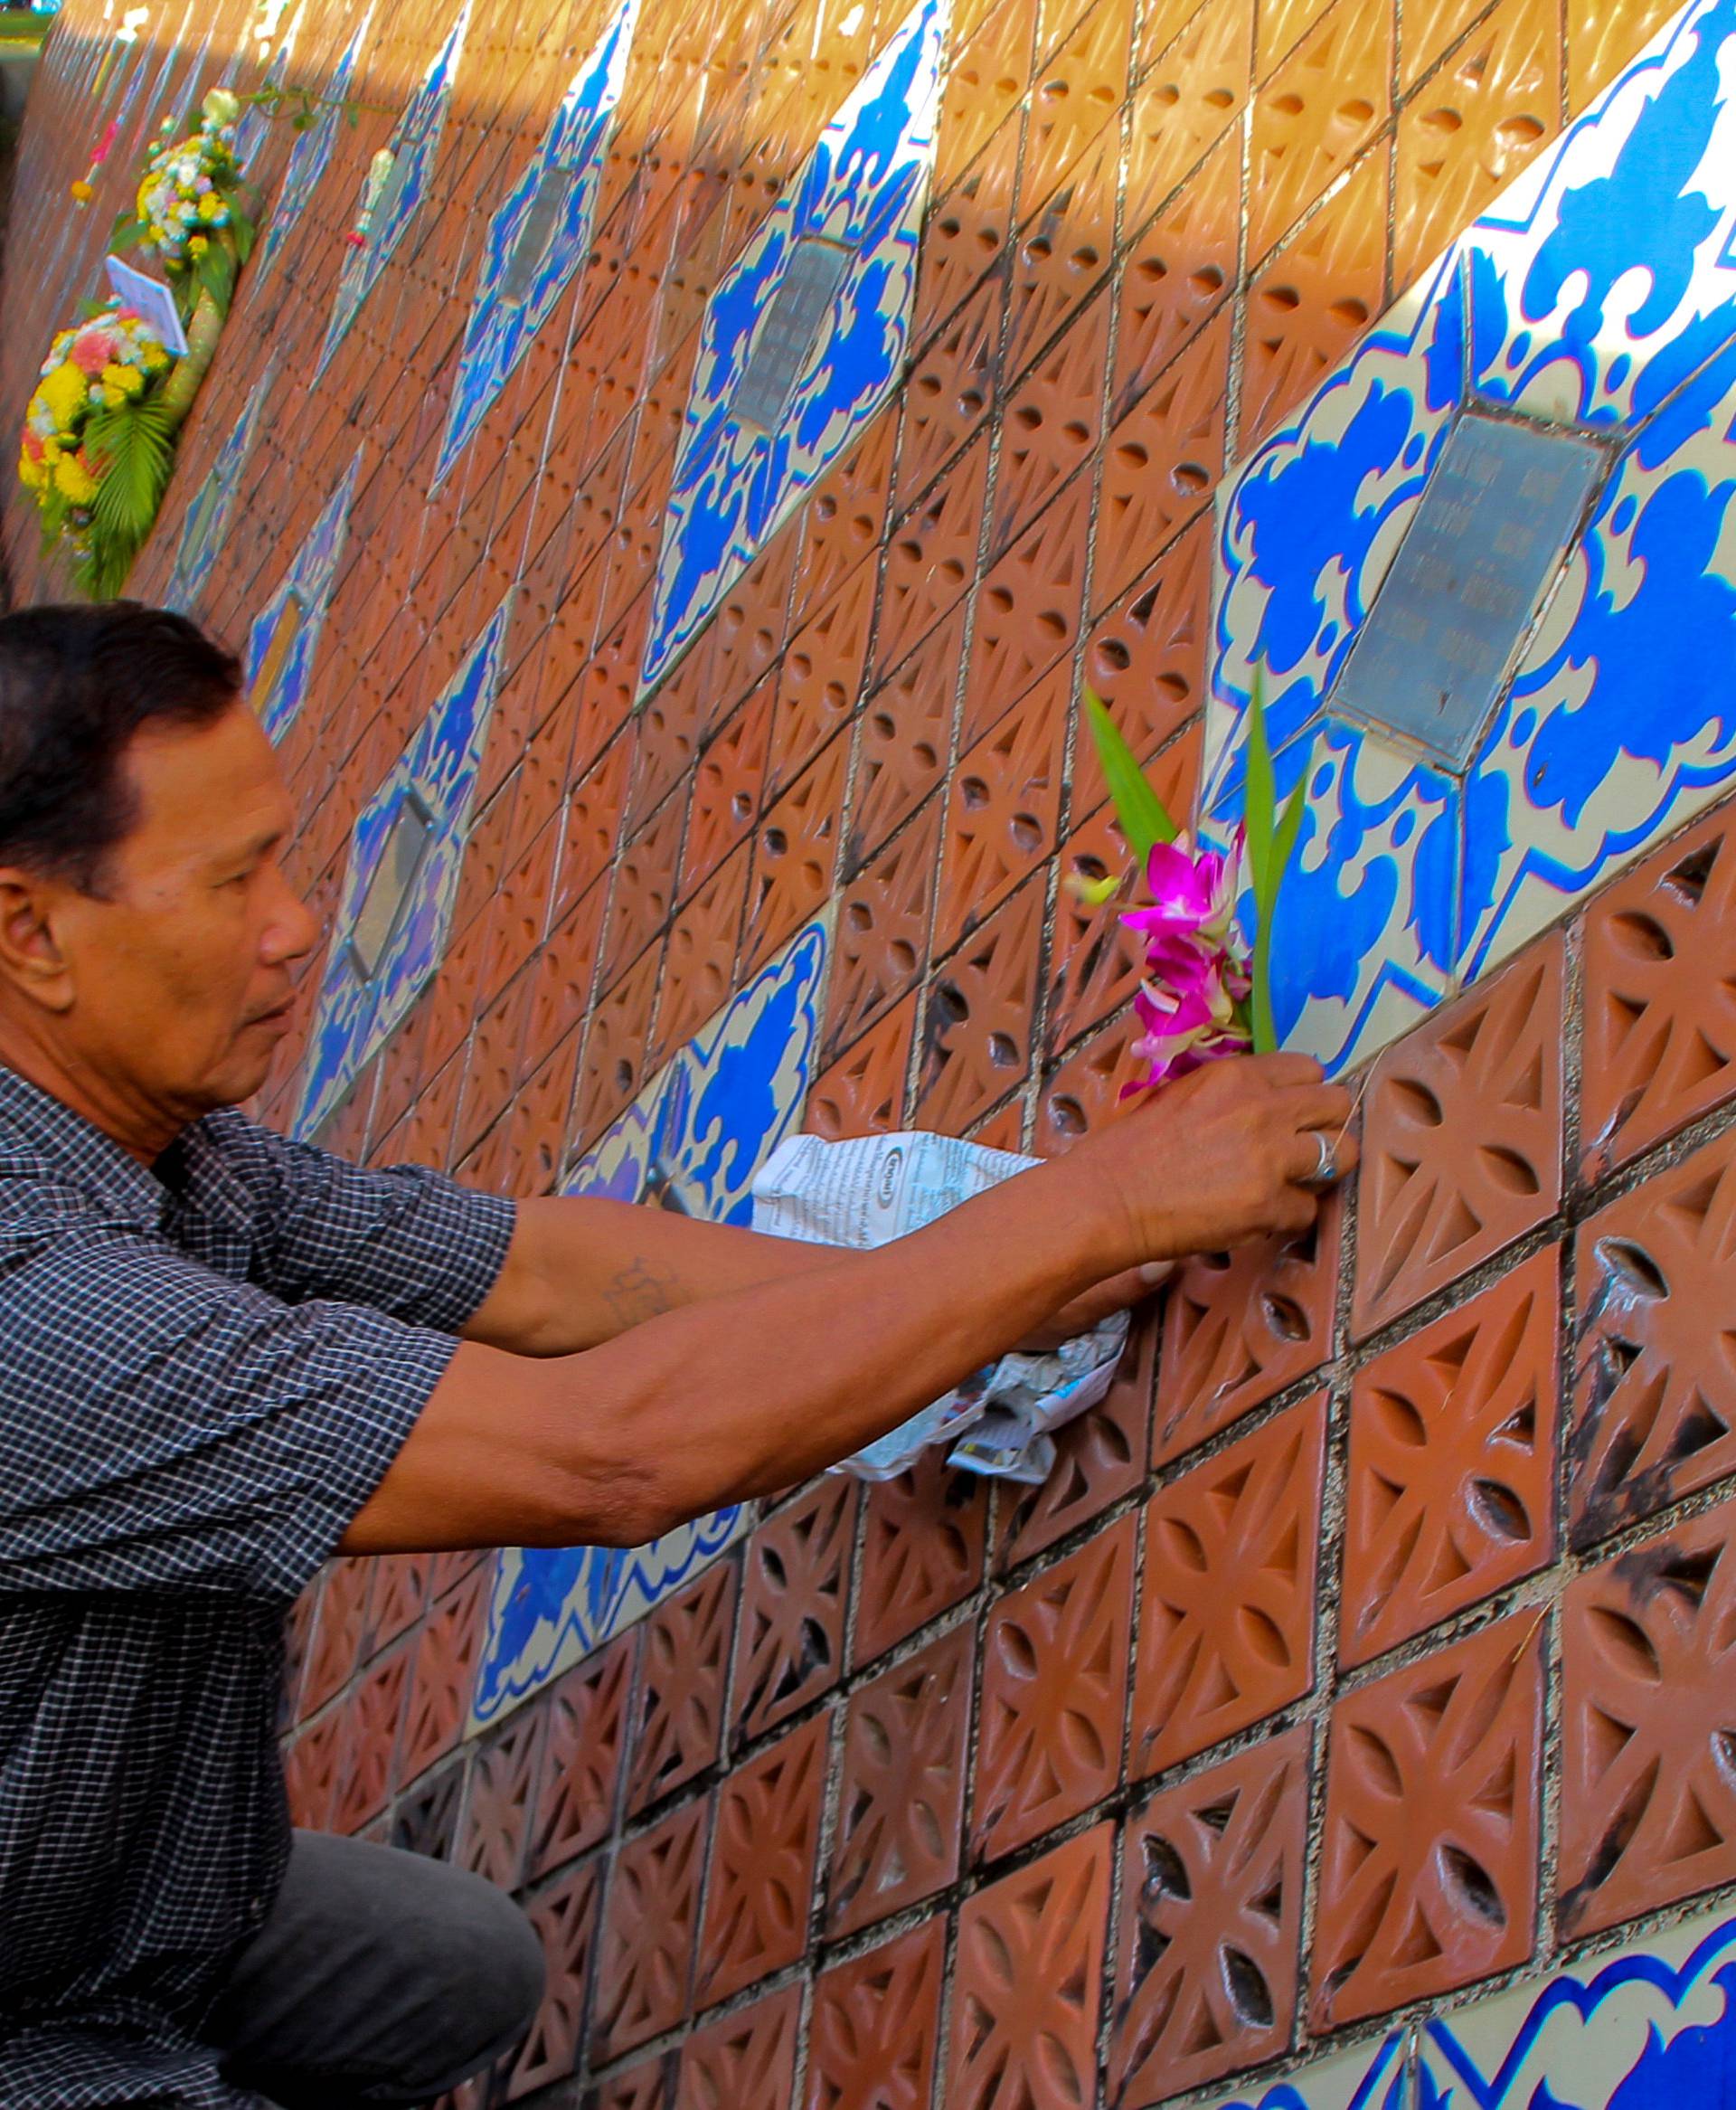 A man places flowers on a wave-shaped tsunami monument for victims of the 2004 tsunami in Ban Nam Khem, a southern fishing village destroyed by the wave, in Phang Nga Province